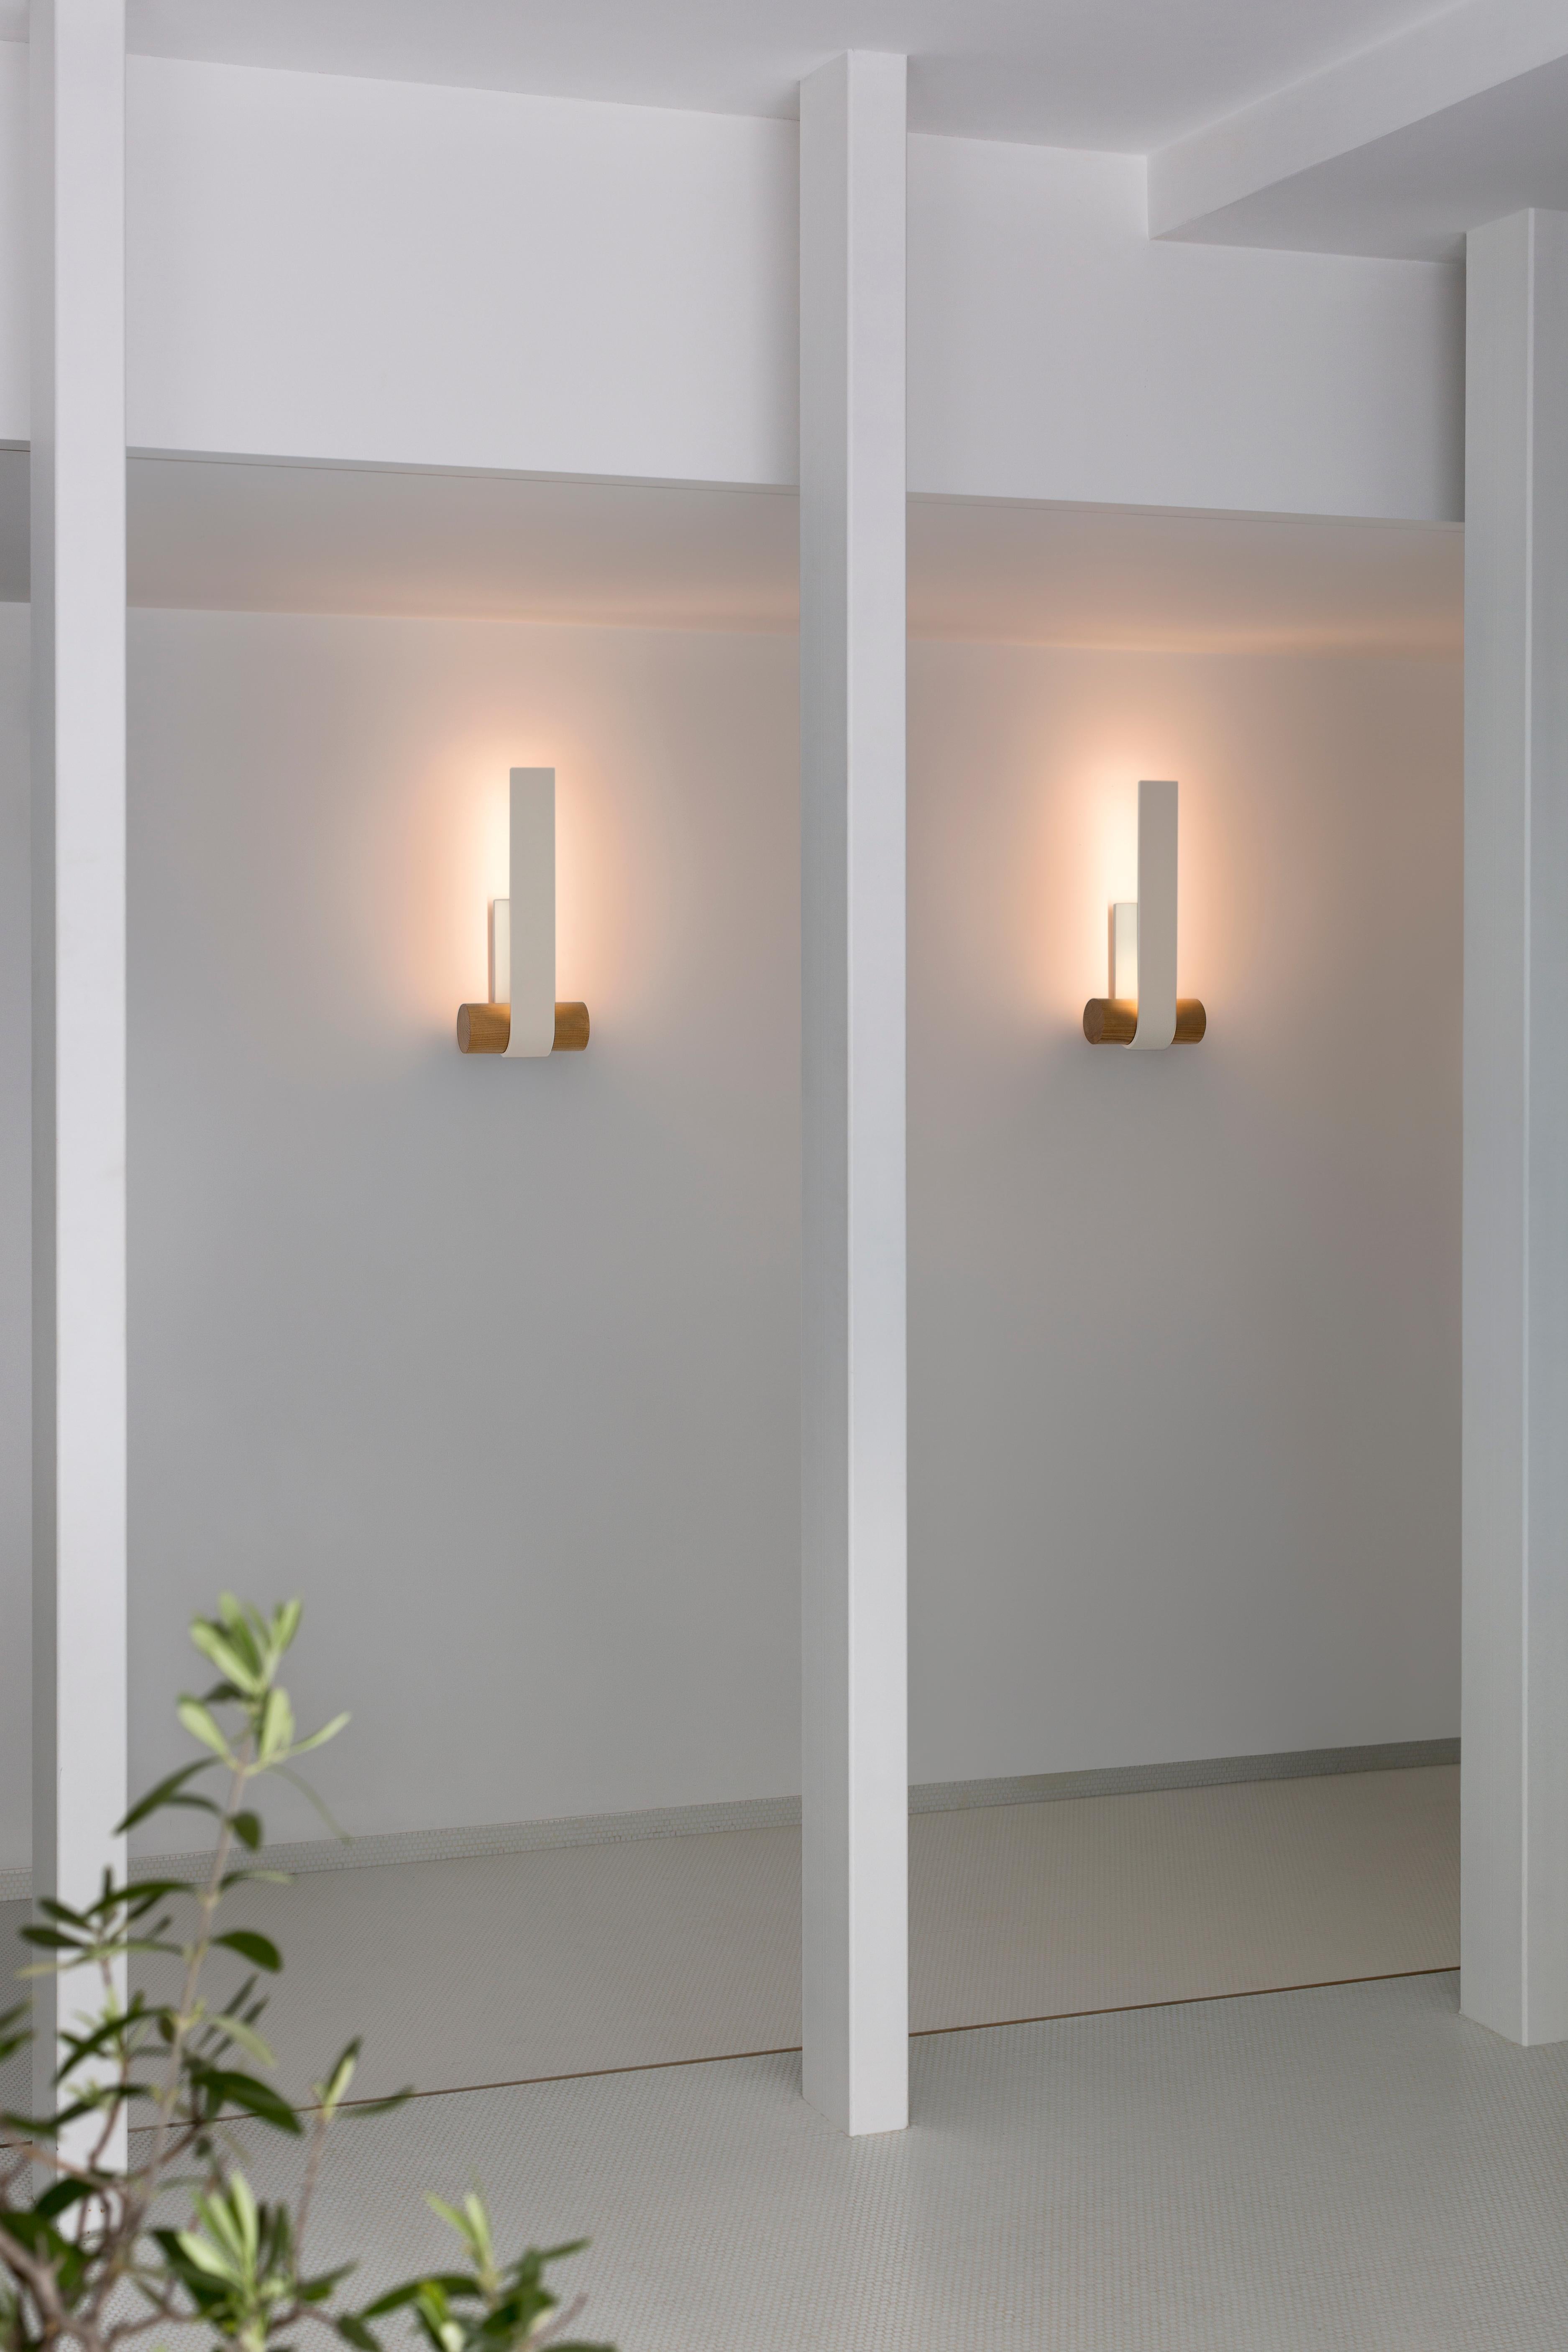 Wall lamp Nastro 563.42 by TOOY
Designer: Studiopepe

Model shown: Beige hardware + Terracotta cylinder
Dimensions: H. 51 x W. 22 x D. 11.6 cm
Source light: 1 x LED 220/240V Compliant with US electric system

LED 17W 2700K

The Nastro wall lamps